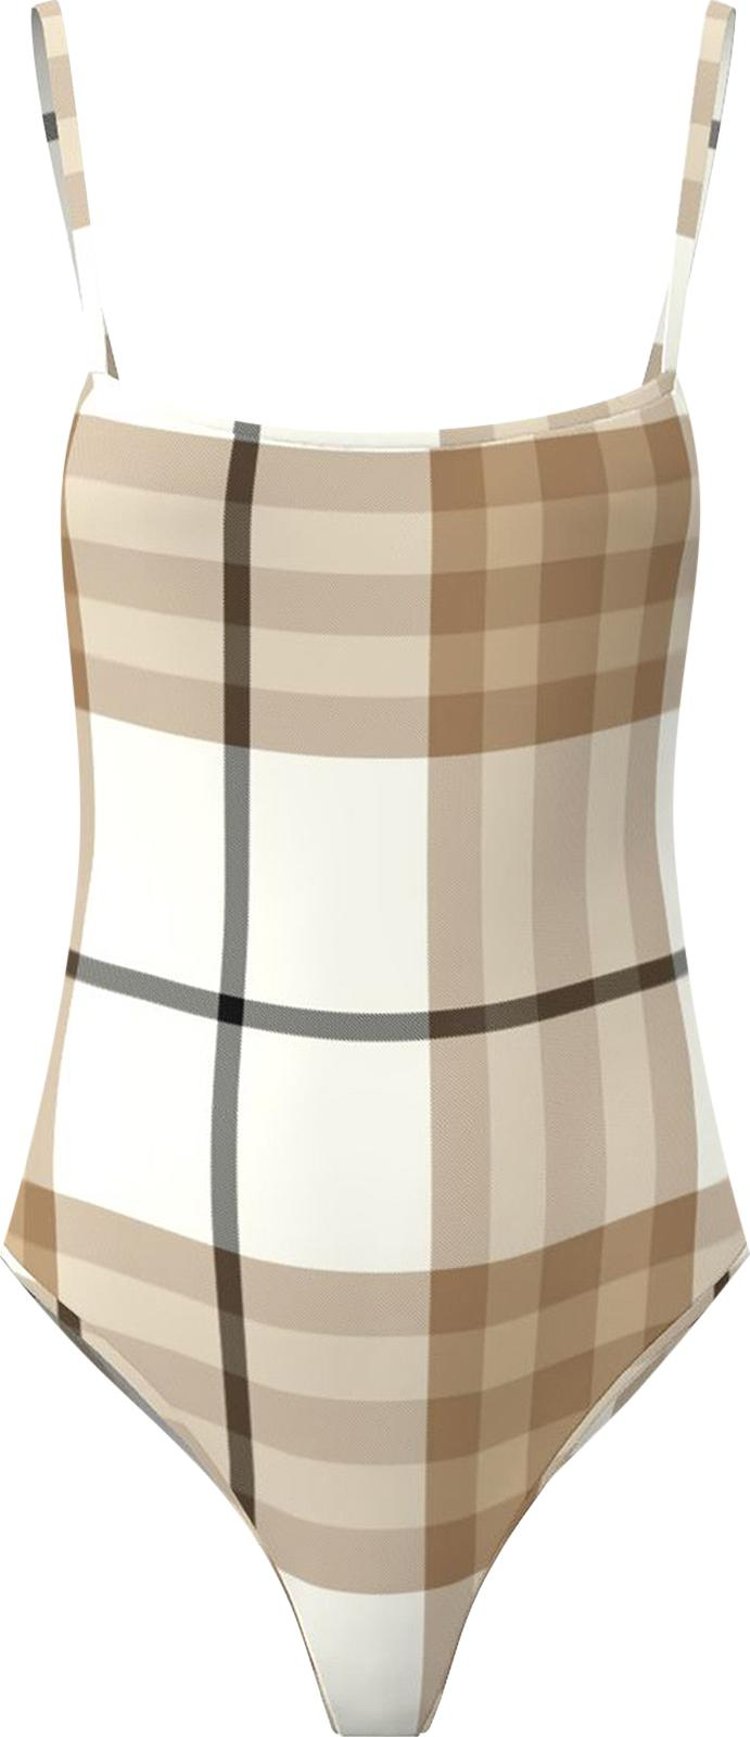 Burberry Check Print Swimsuit 'Frosted White/Beige'